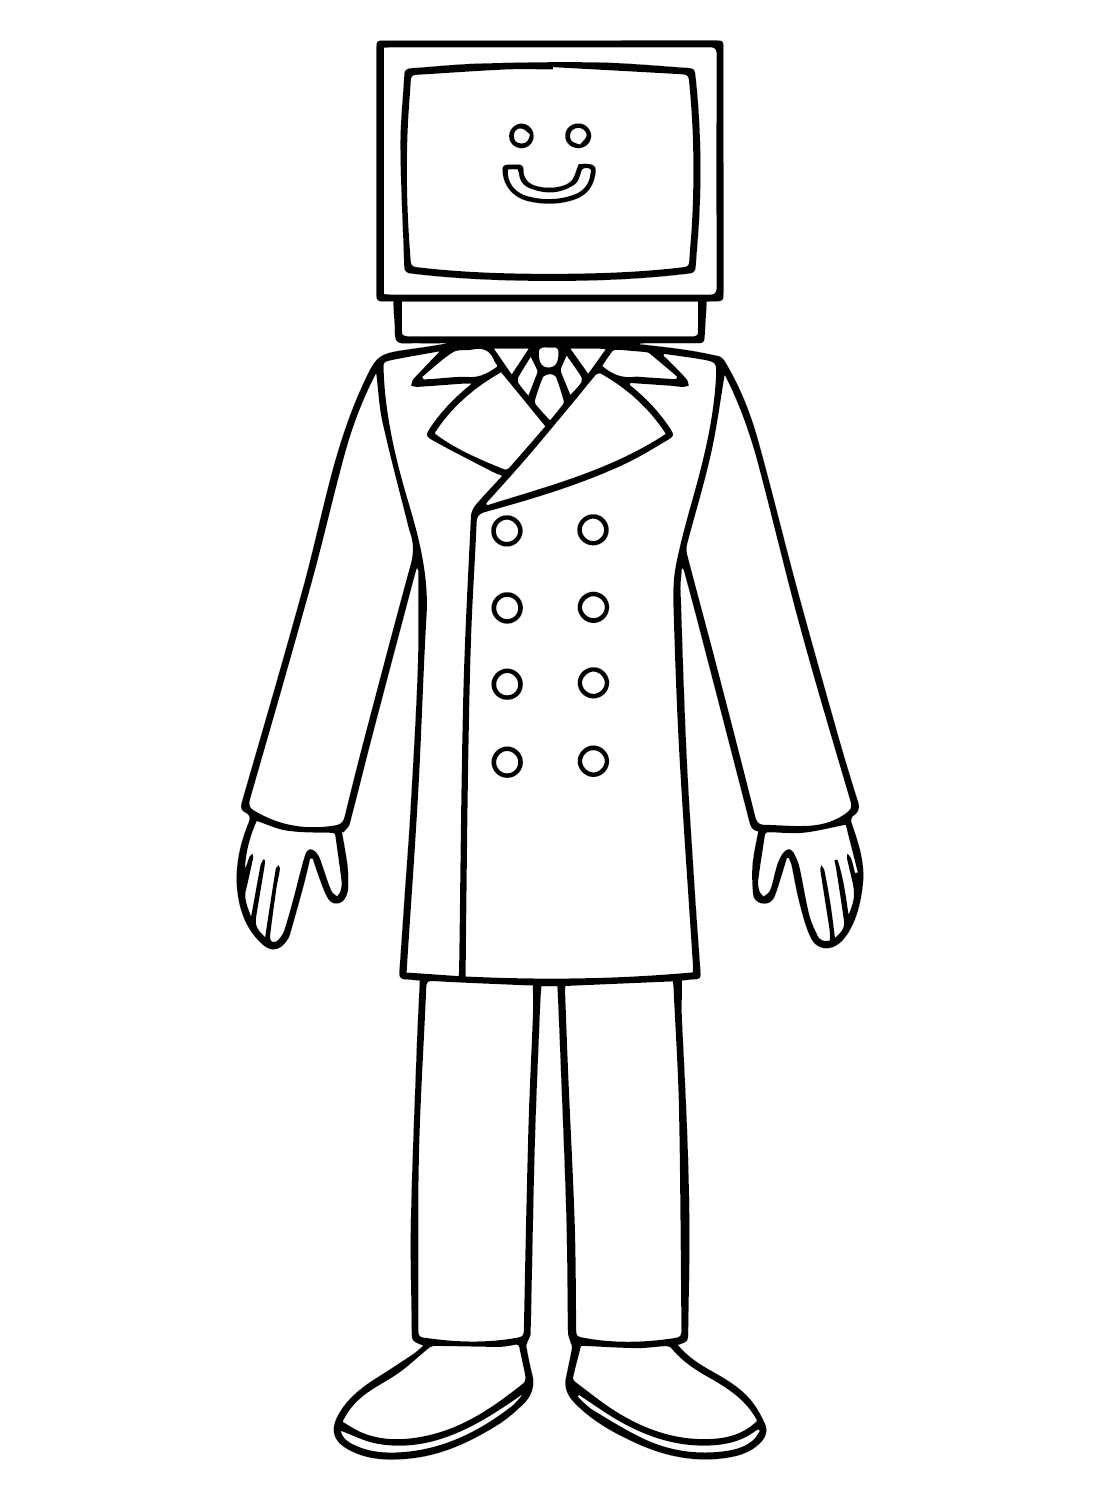 TV Man Coloring Pages For Kids from TV Man